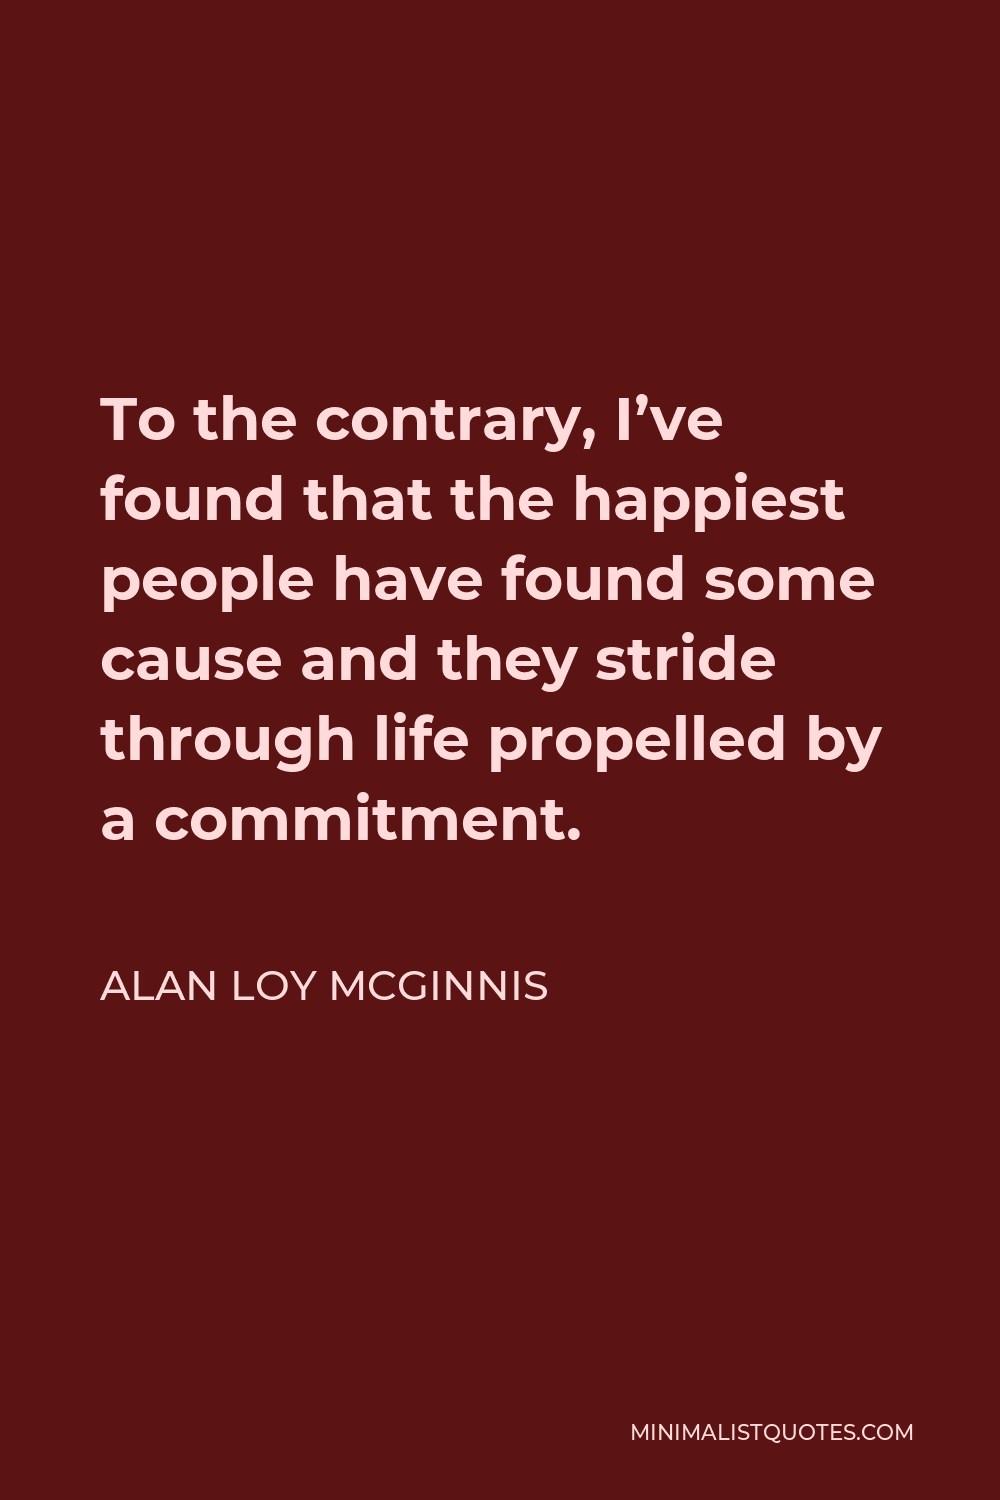 Alan Loy McGinnis Quote - To the contrary, I’ve found that the happiest people have found some cause and they stride through life propelled by a commitment.